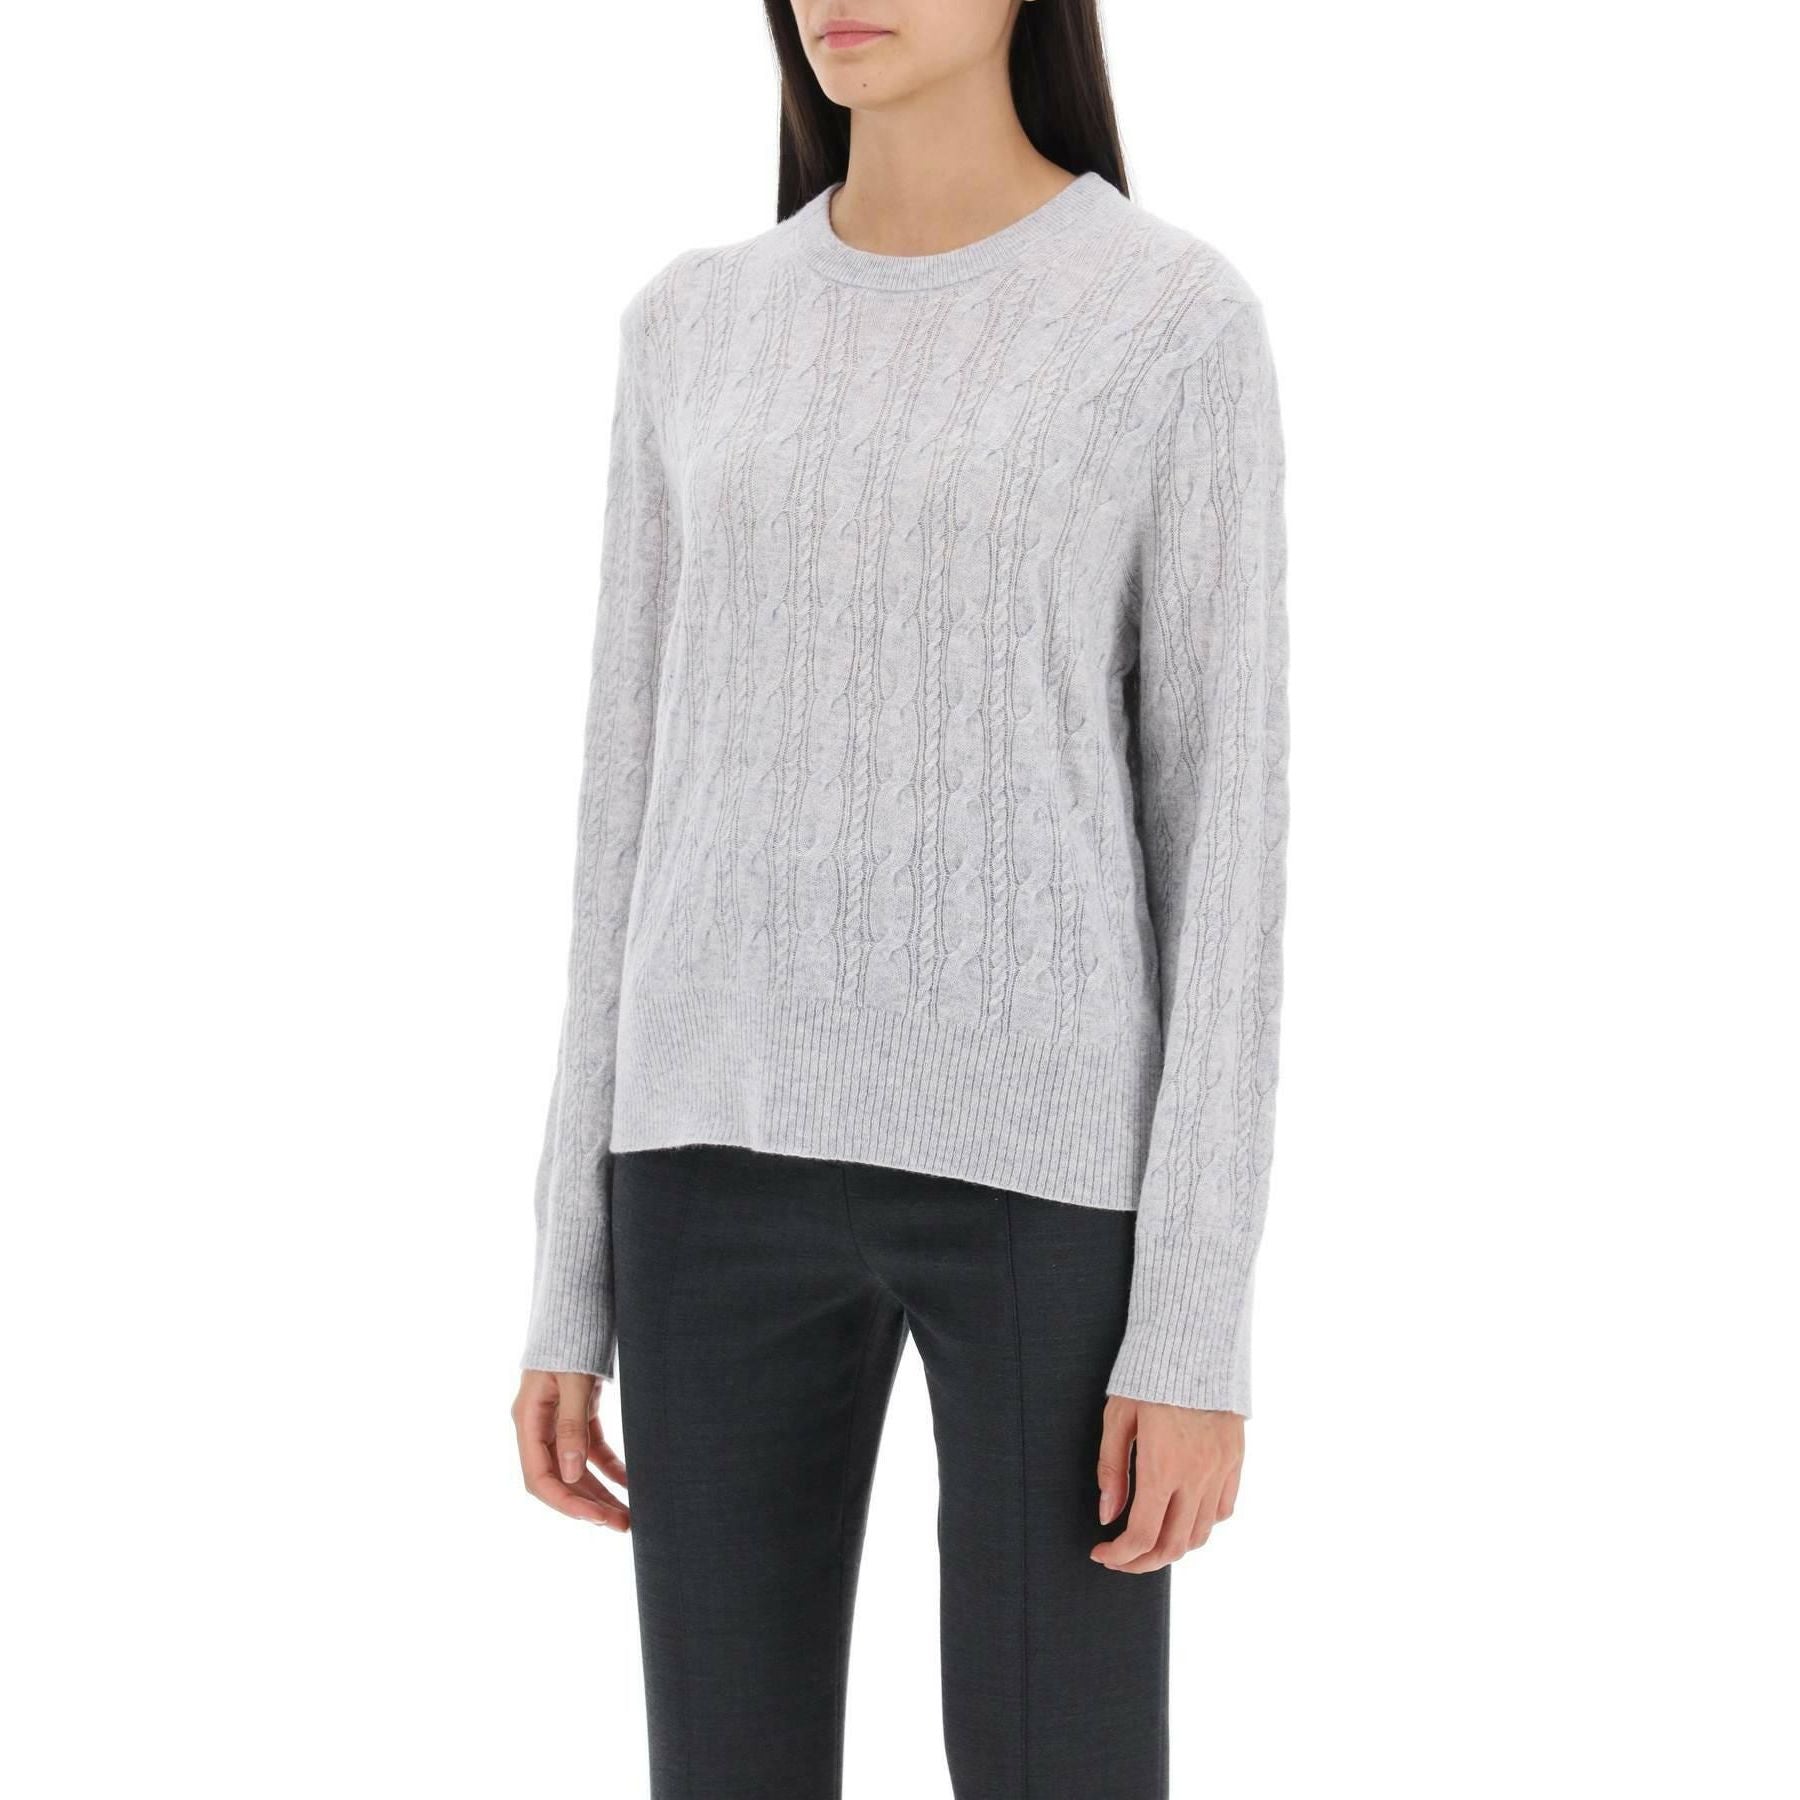 Twin Cable Cashmere Sweater GUEST IN RESIDENCE JOHN JULIA.